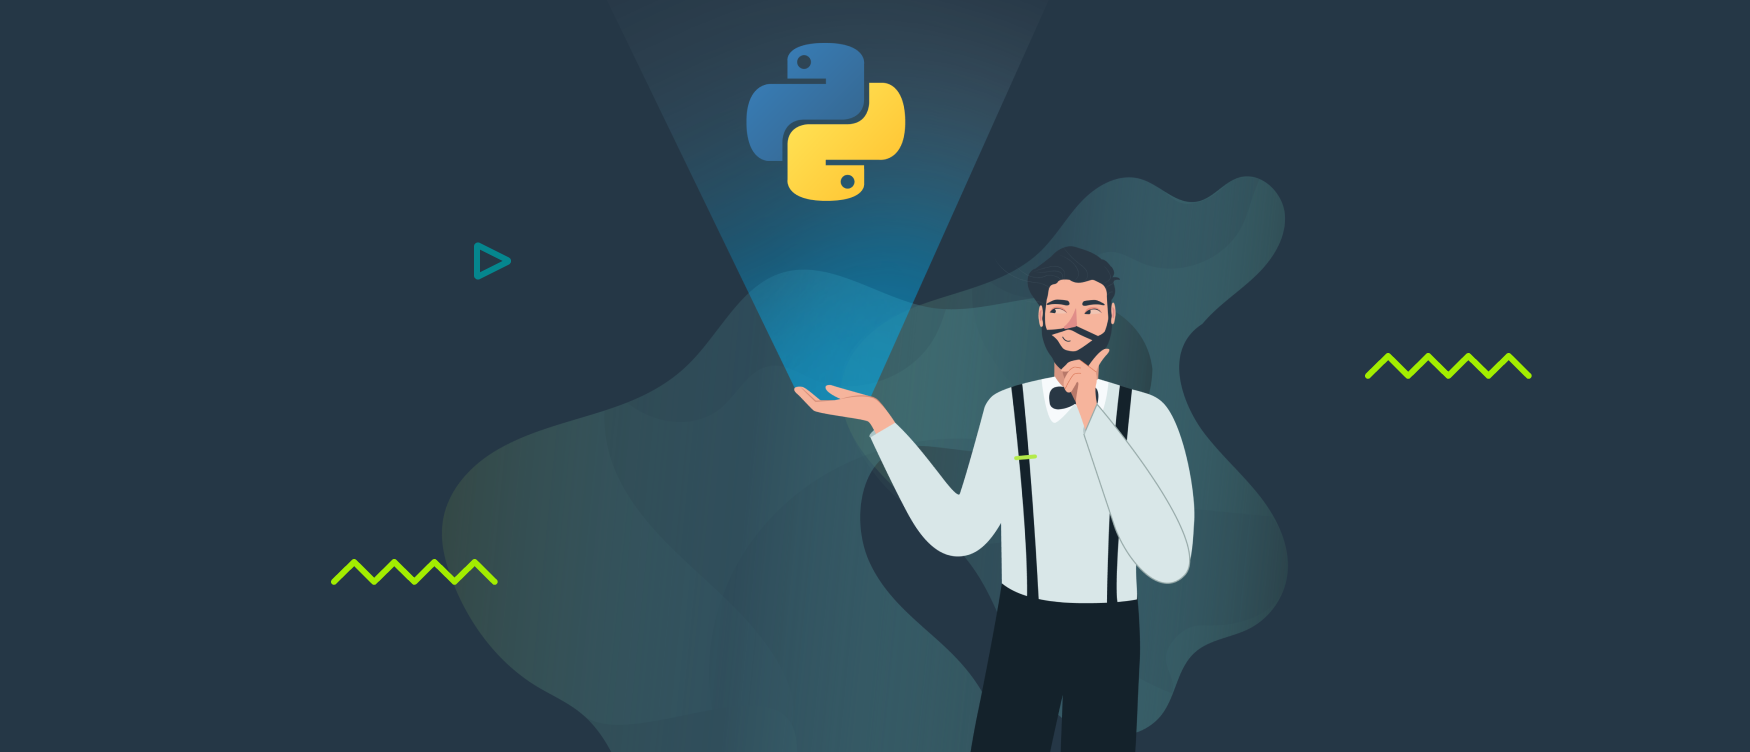 Why is the Python programming language so popular?